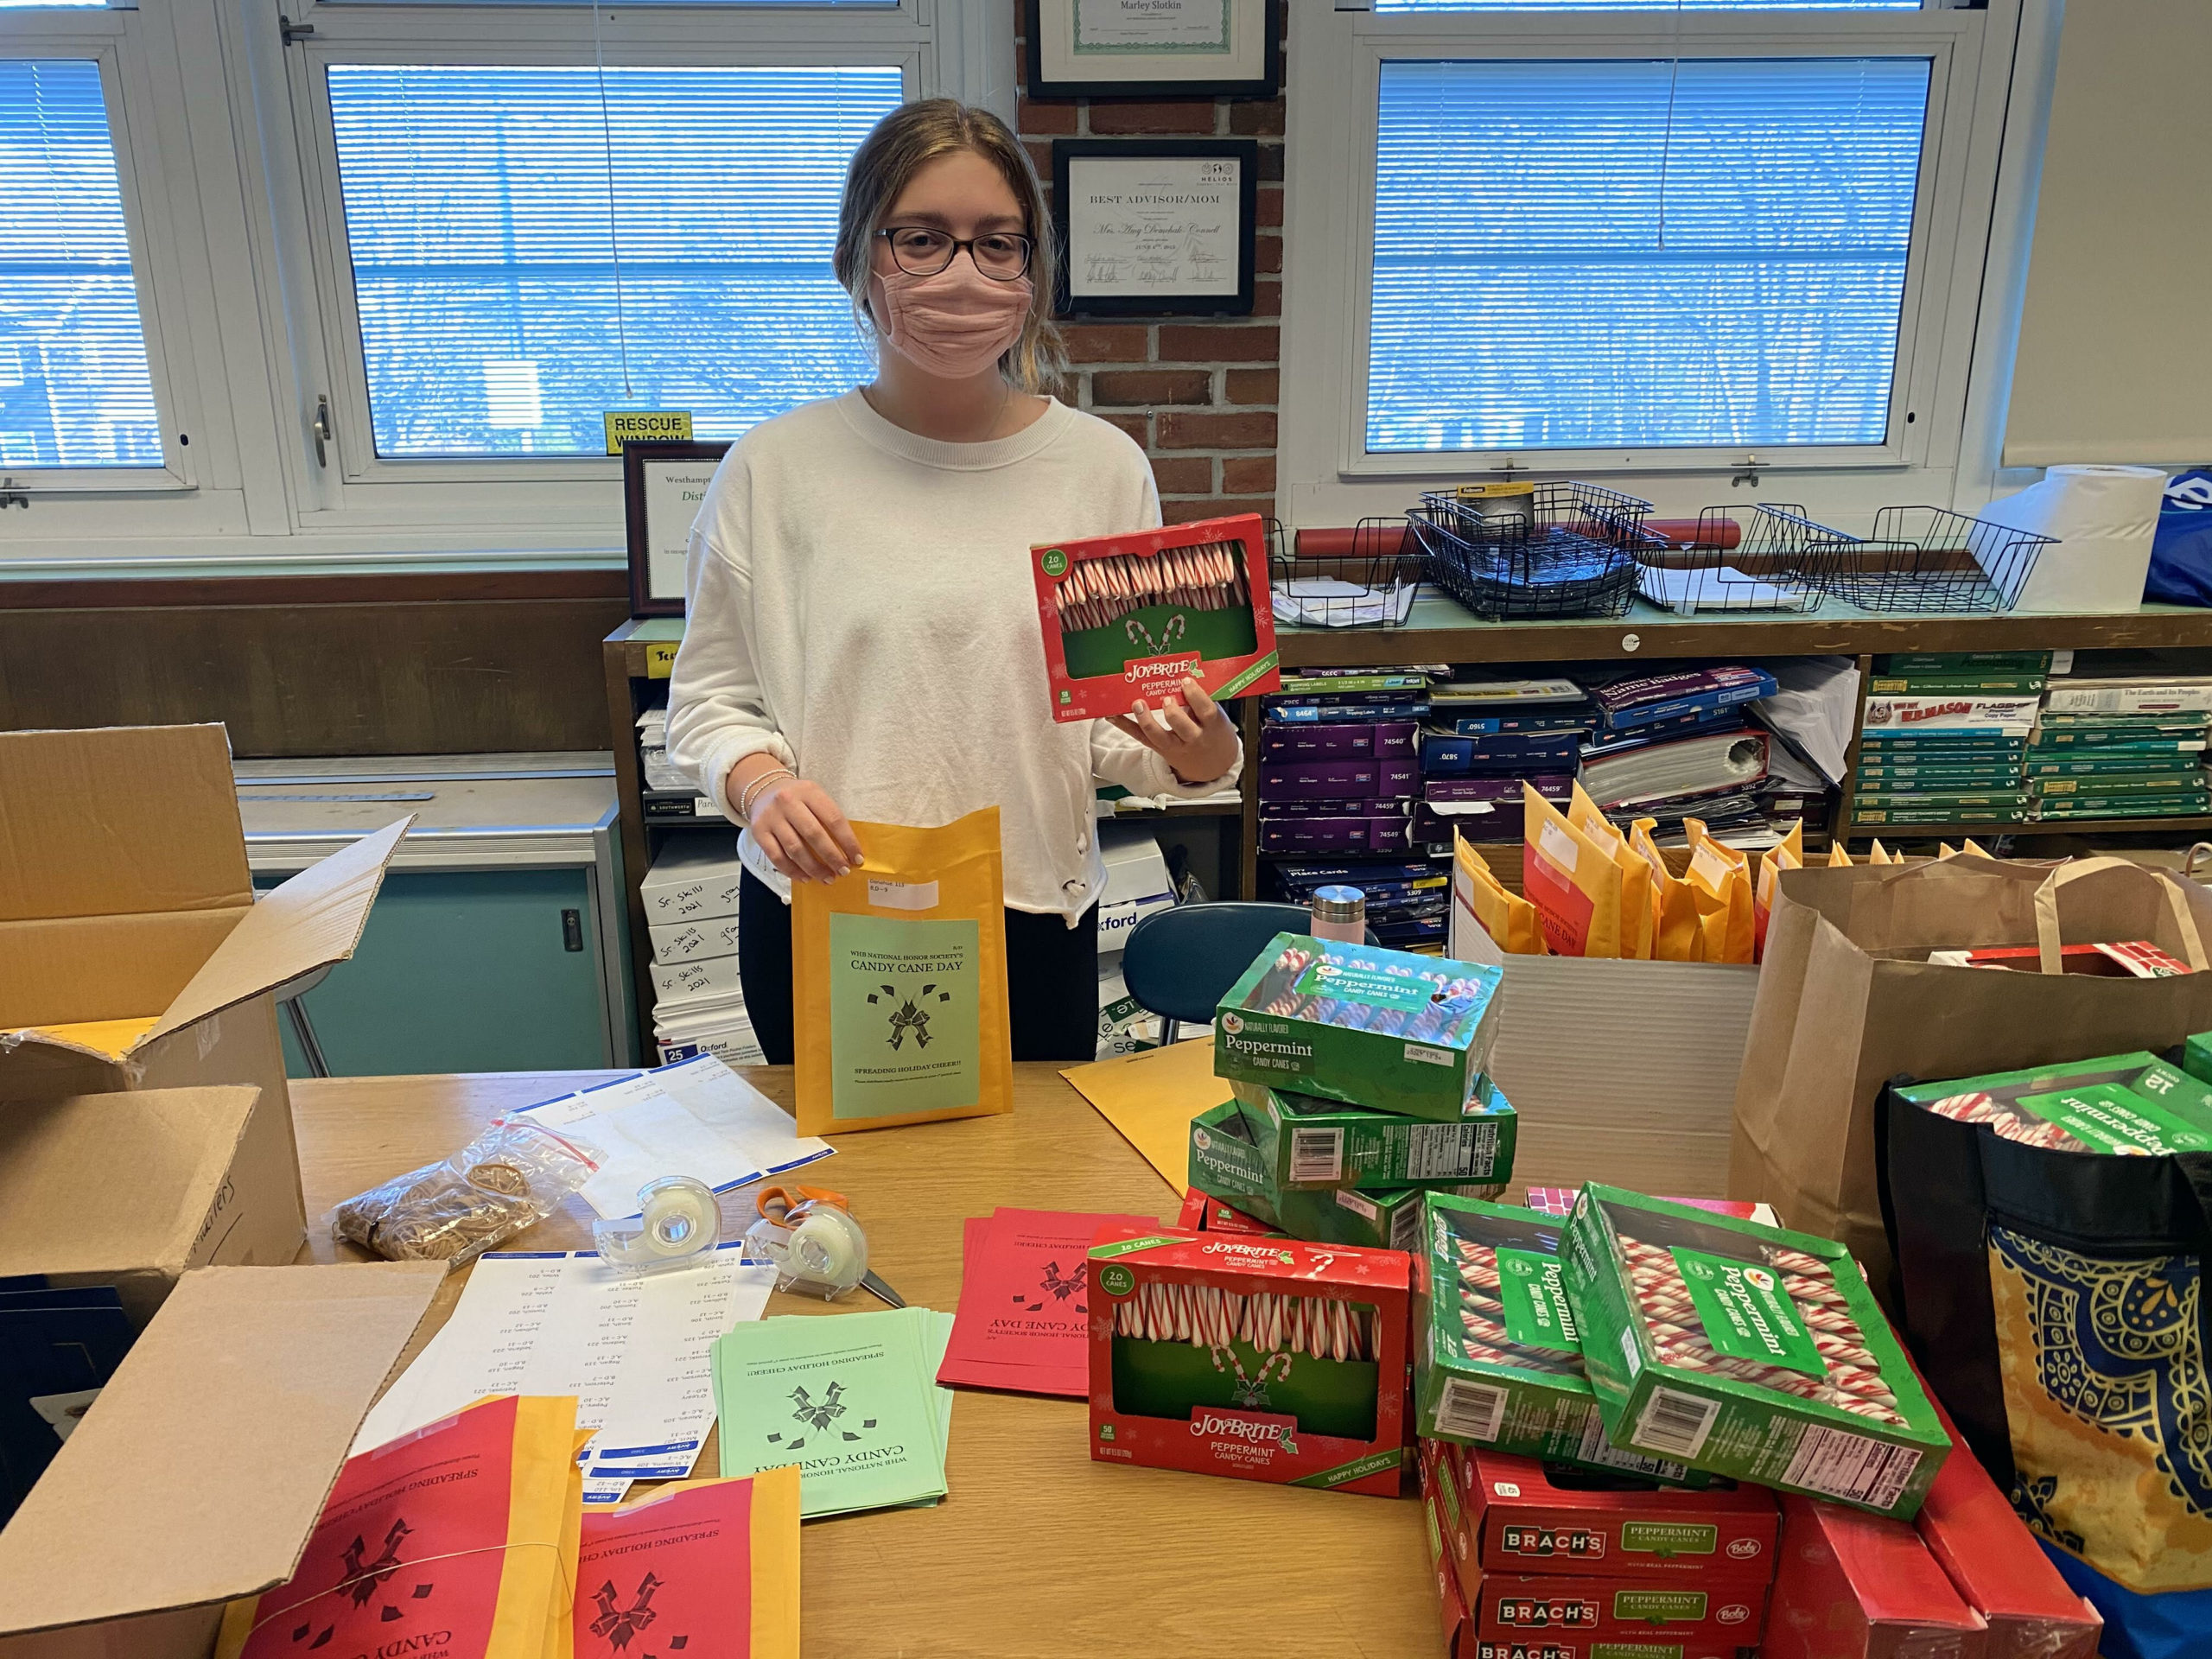 To generate holiday spirit among students and faculty, members of the Westhampton Beach High School National Honor Society generously donated enough candy canes for every student and teacher in the building. The candy canes will be distributed during the week of December 21. Pictured is National Honor Society treasurer Jane Paulson. 